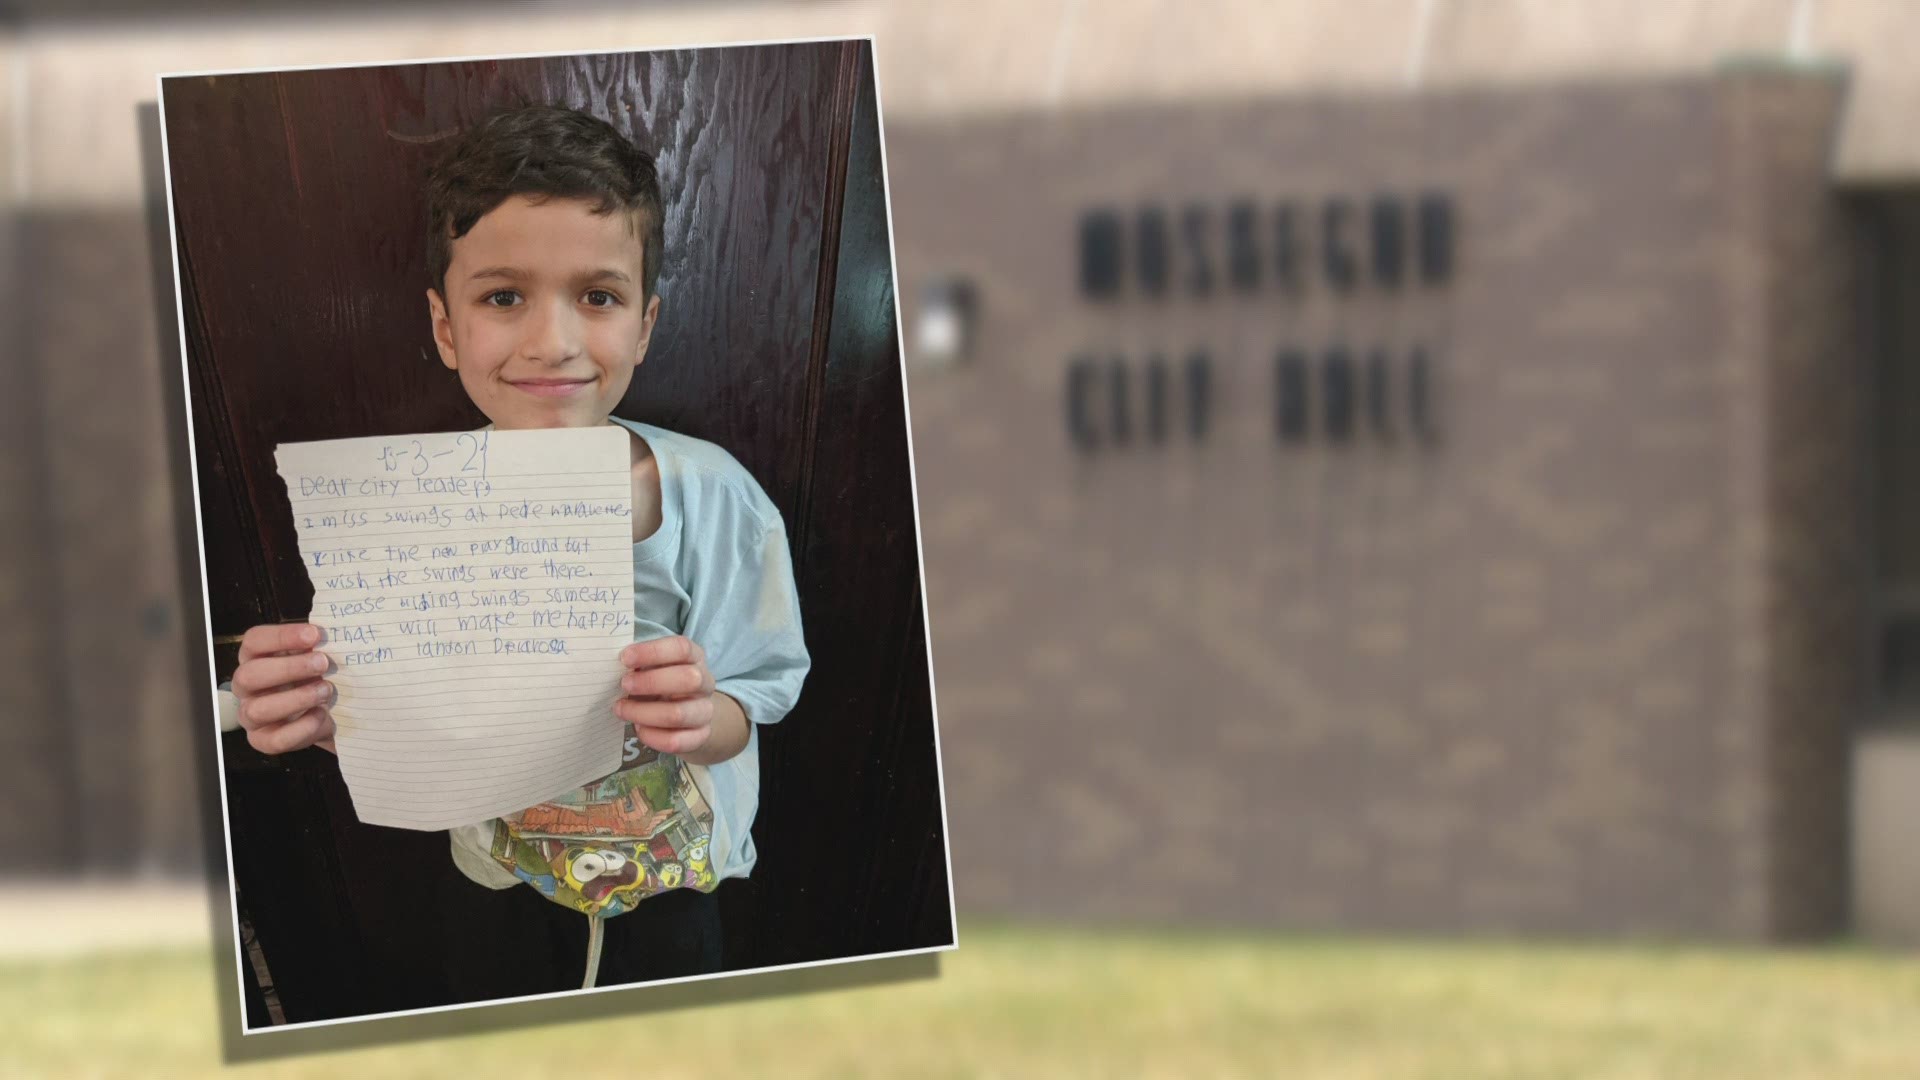 Landon De La Rosa was sad when he saw the swing set at Muskegon's Pere Marquette Beach was gone. A letter he wrote has city officials, including the Mayor, thinking.